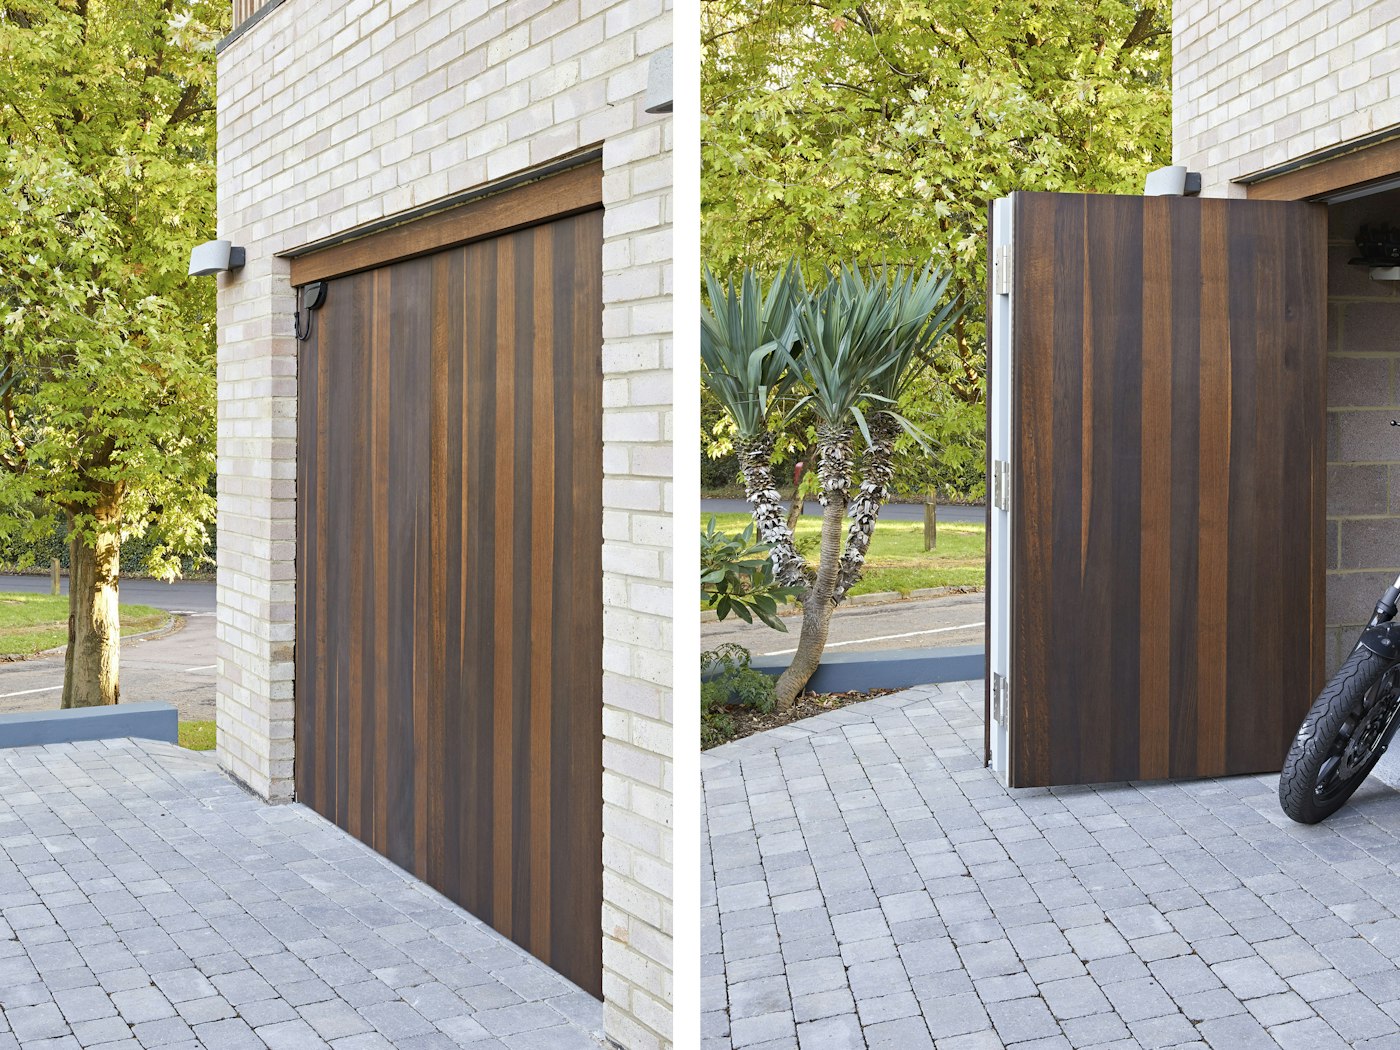 The garage door, though small, brings impact and cohesion having been crafted from the same fumed oak 